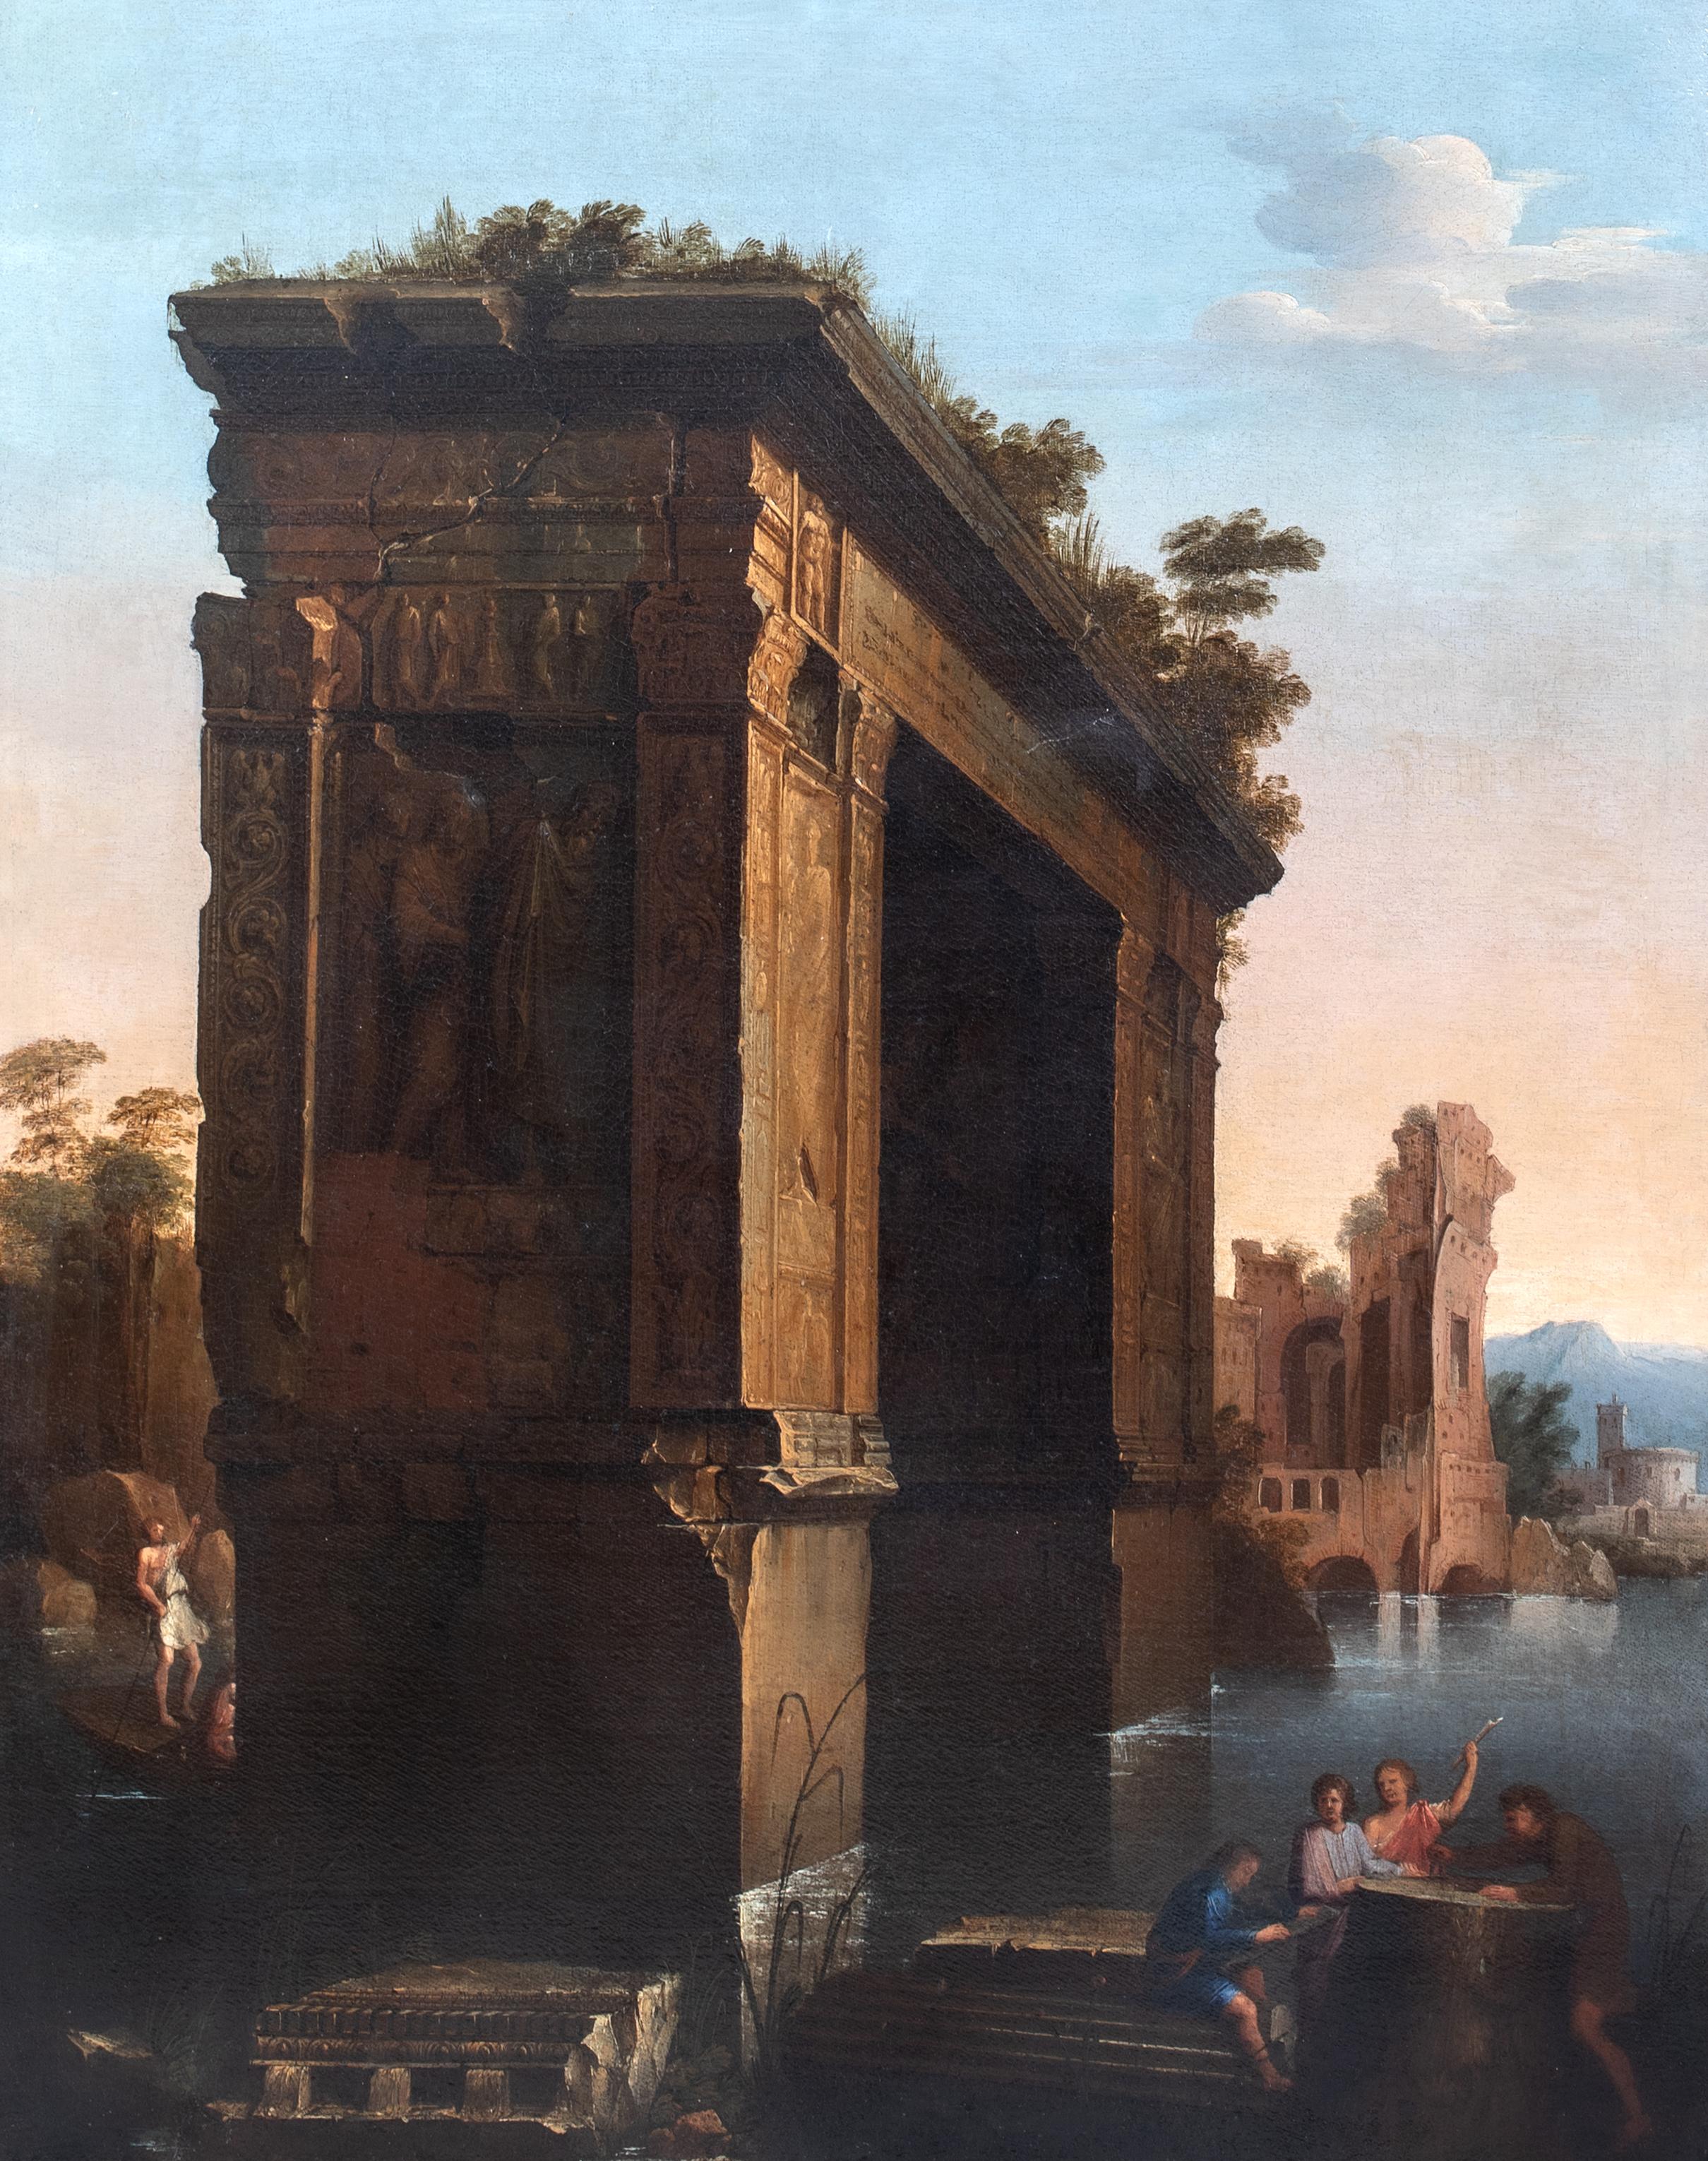 Figures By The Ruins Of An Arch, 18th Century 

studio of Giovanni Paolo PANINI (1691-1765)

Large 18th-century Italian architectural ruins landscape with classical figures, oil on canvas. Good quality and condition capriccio of flooded ancient